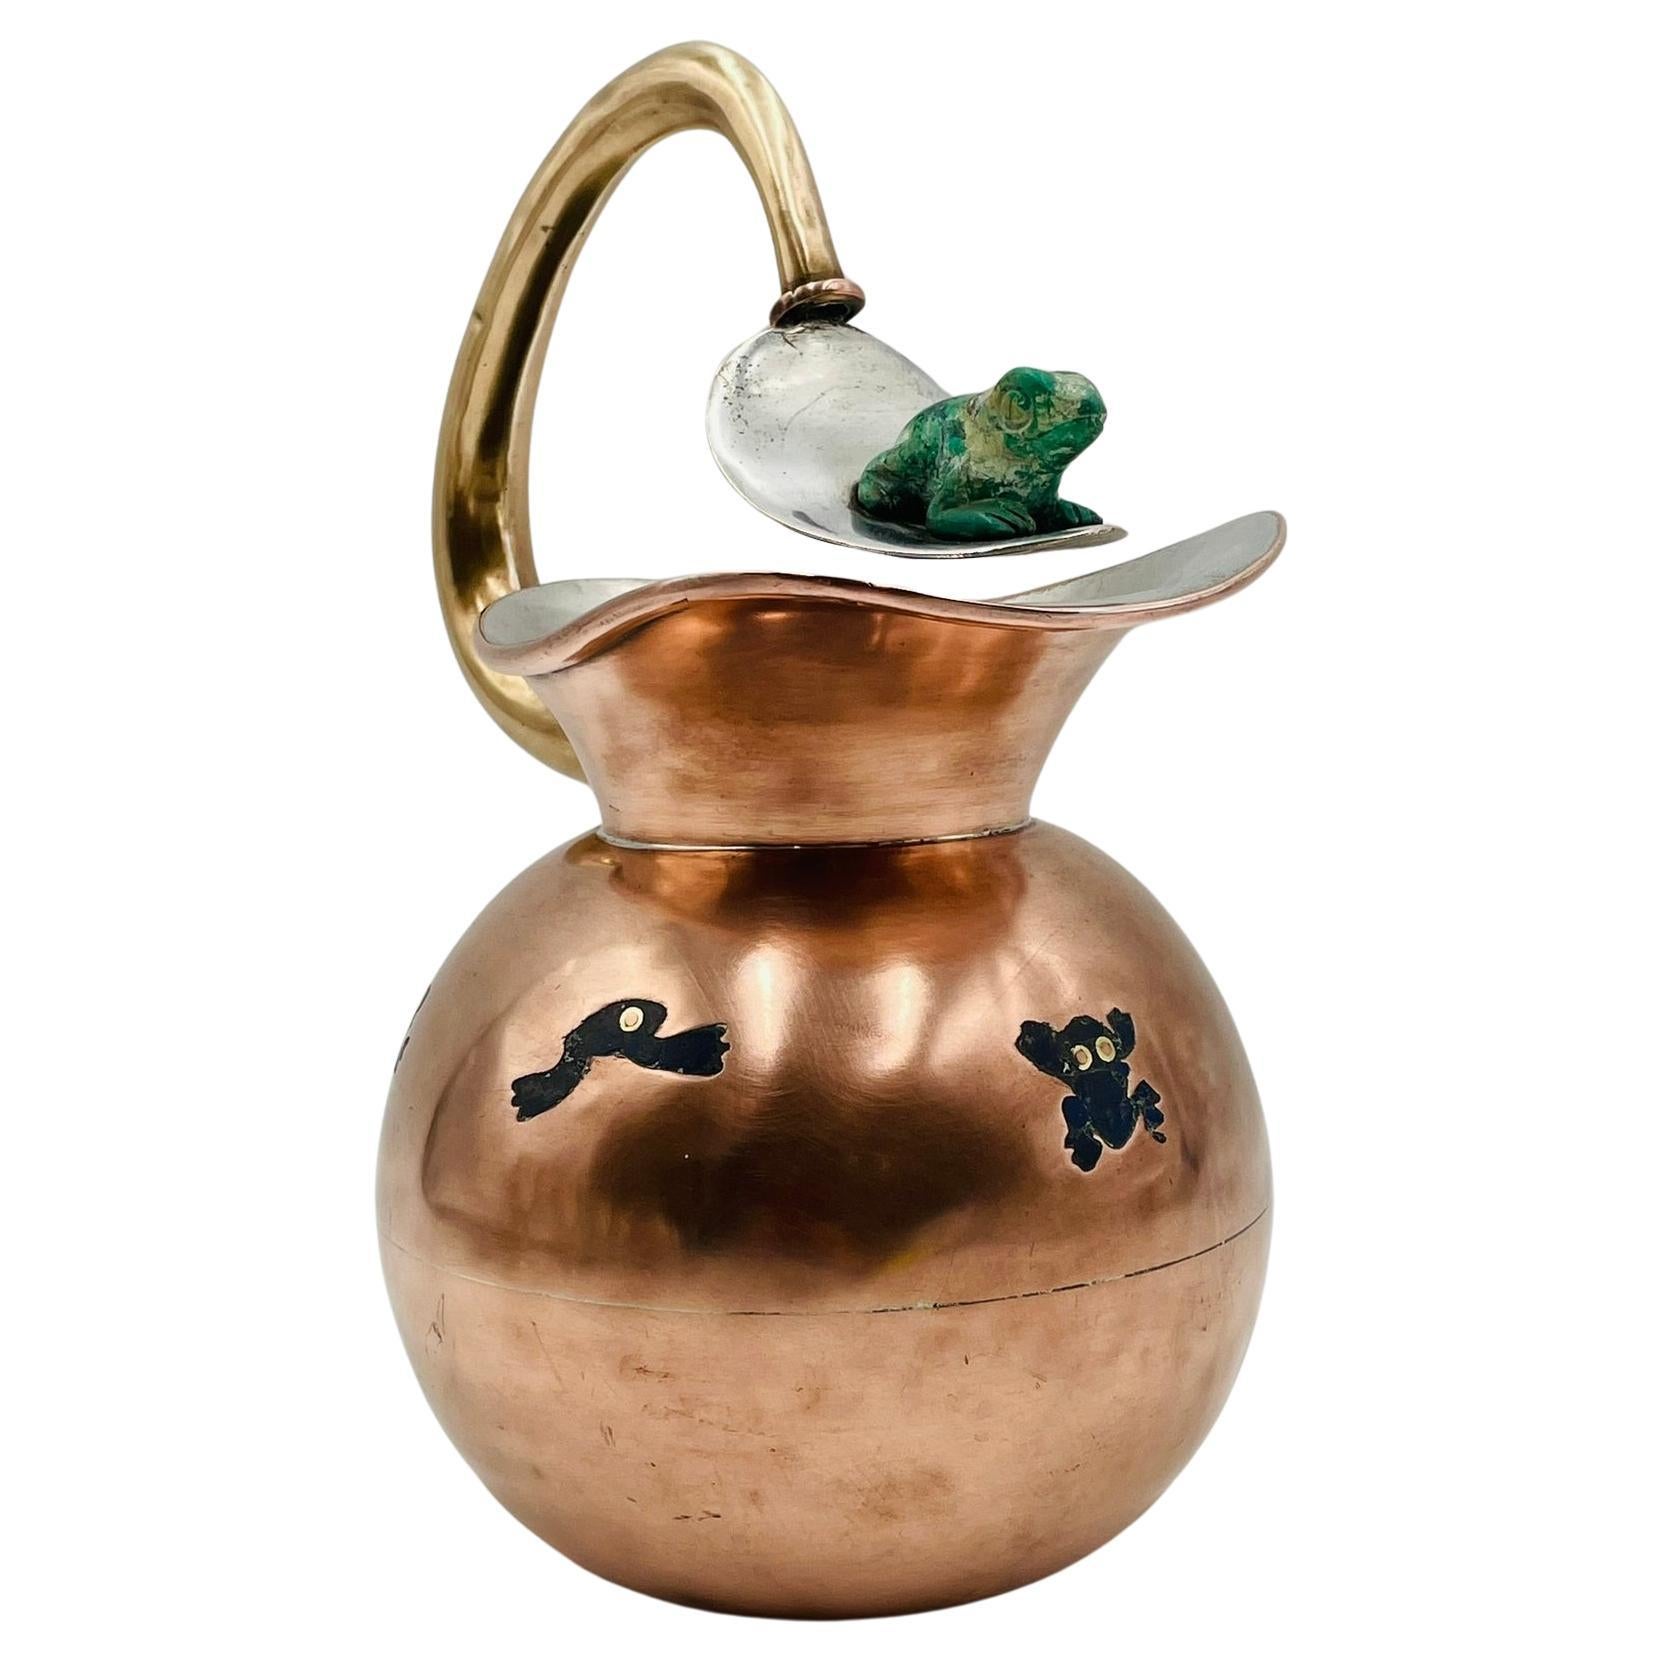 Elevate your home decor with this stunning Copper, Silver & Stone Pitcher by Los Castillo, Mexico from the 1960s. Crafted with exquisite craftsmanship at the shop of Los Castillo in Taxco Guerrero, Mexico.

 This pitcher features a unique design